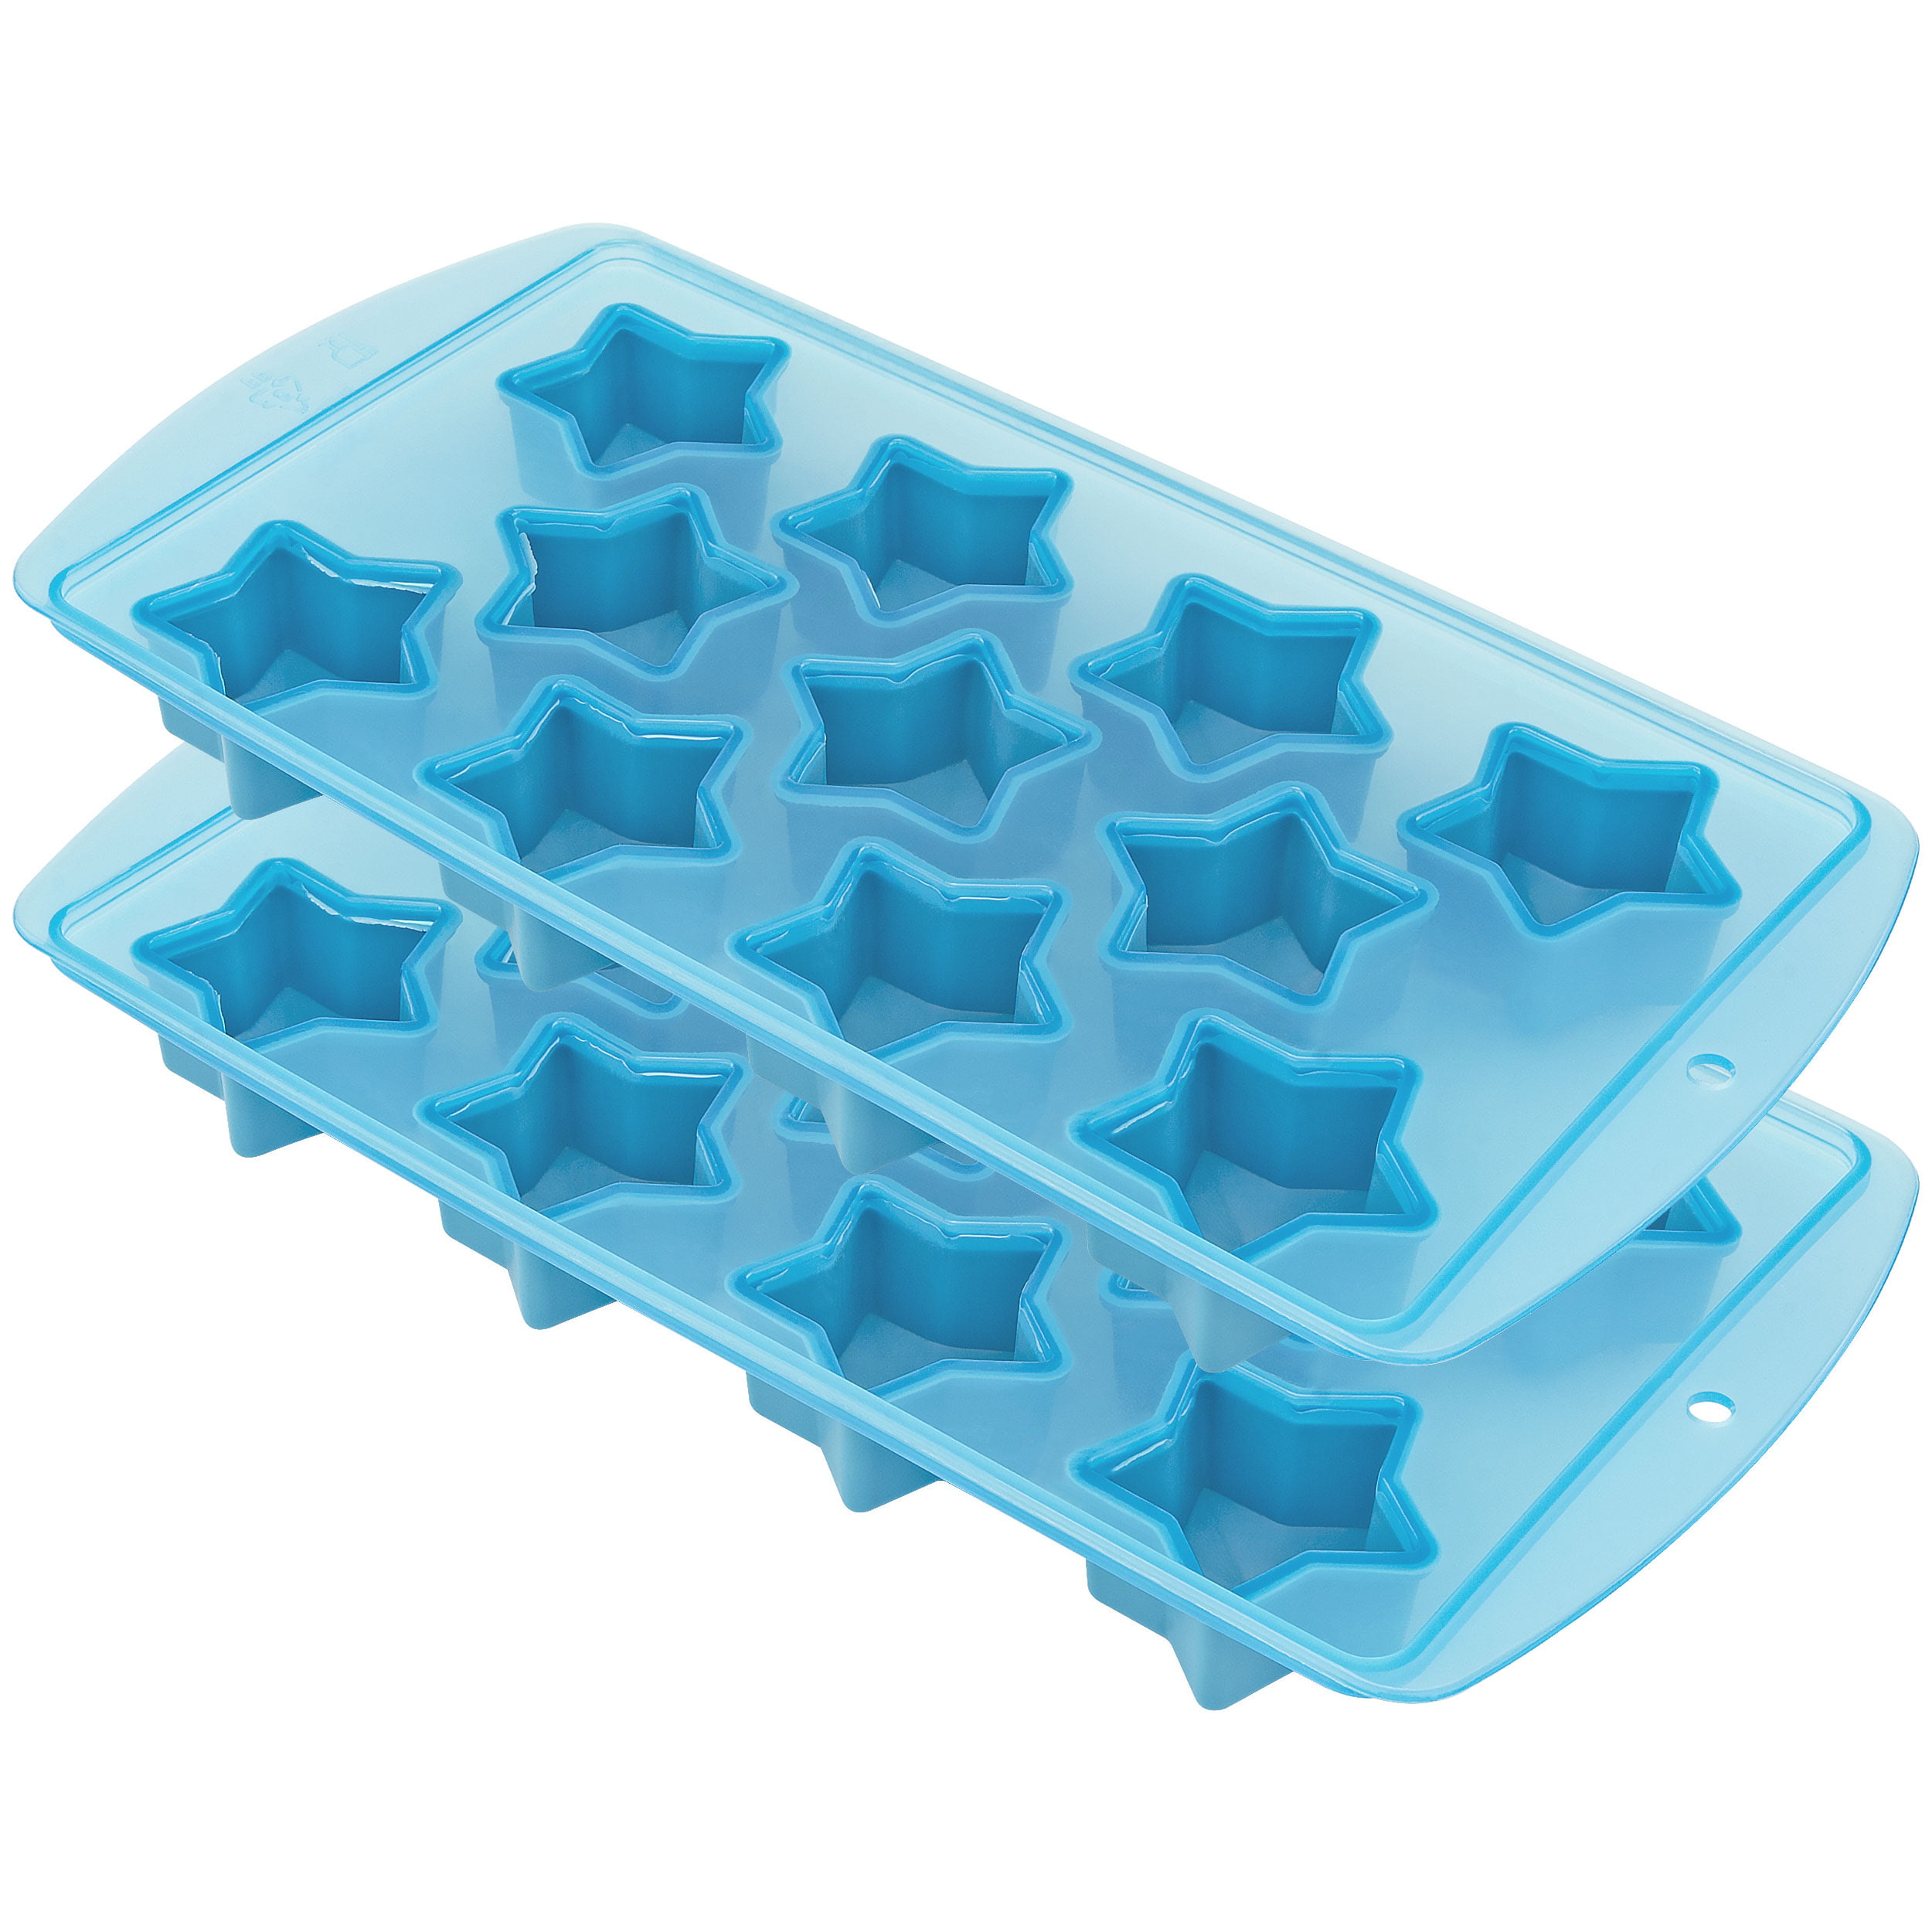 Novelty Ice Cube Mold 2 Pack Spoof Silicone Prank Ice Cube Tray